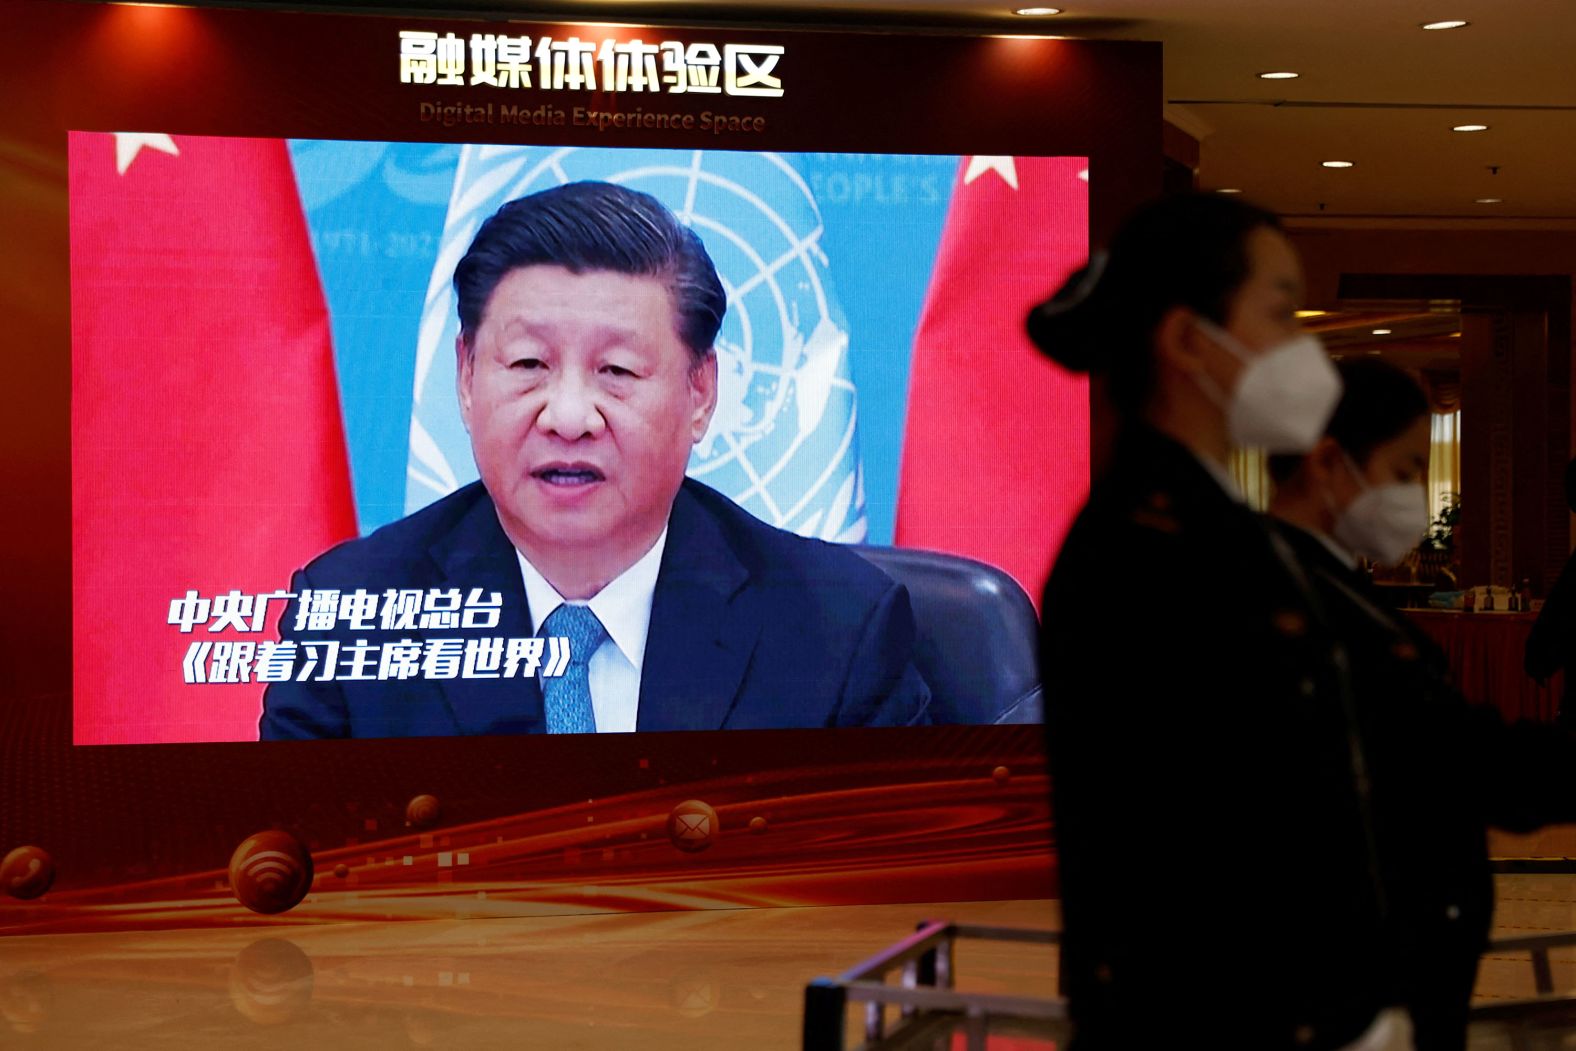 Xi appears on a screen at a hotel hosting the media in Beijing on October 19.